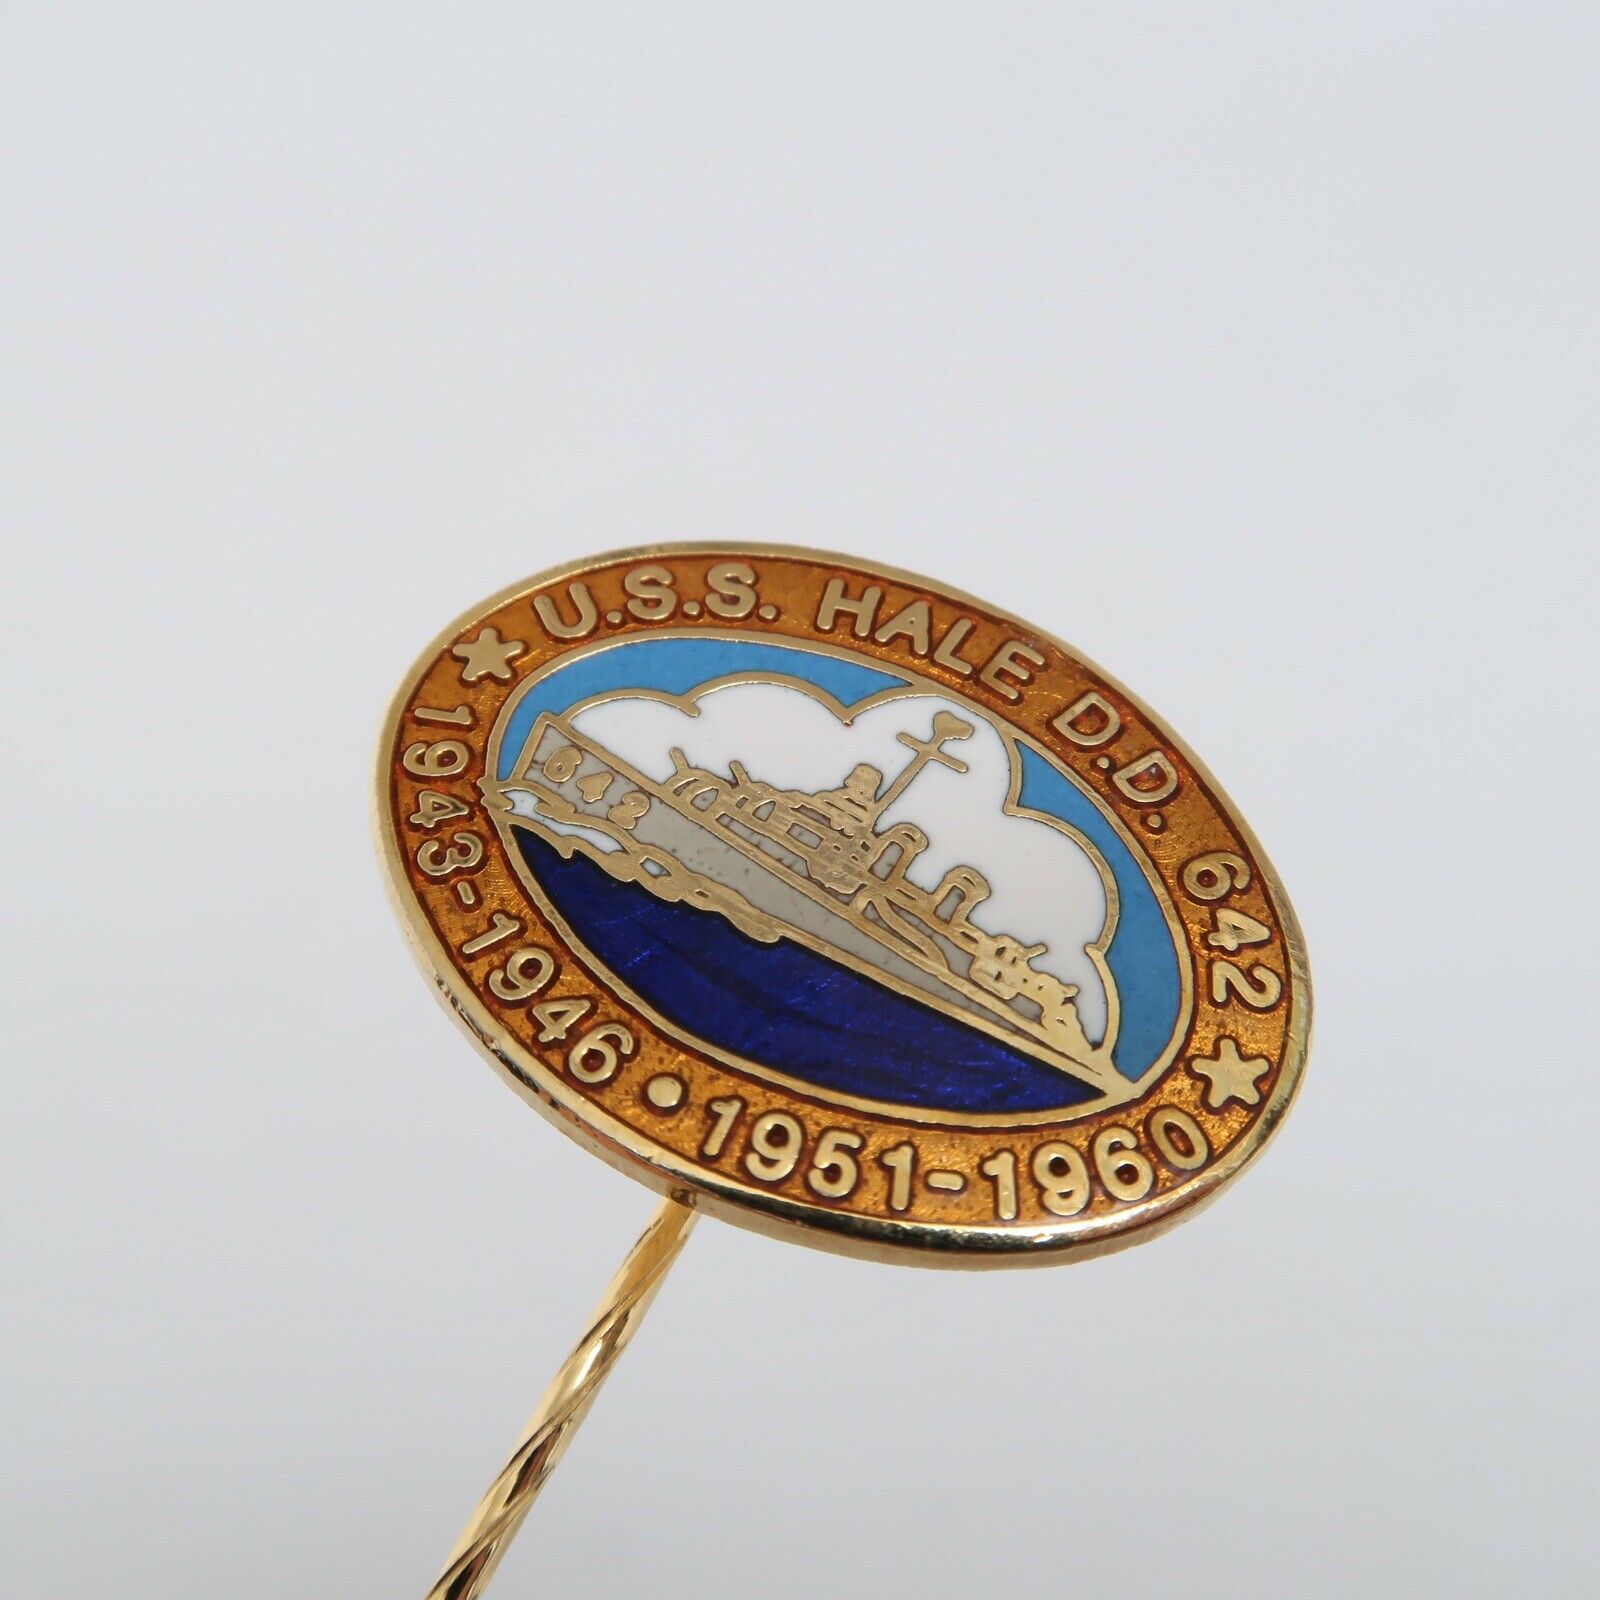 Uss Nathan Hale Ssbn 623 Hat Lapel Pin Up Us Navy Missile Submarine Gift Sub Wow